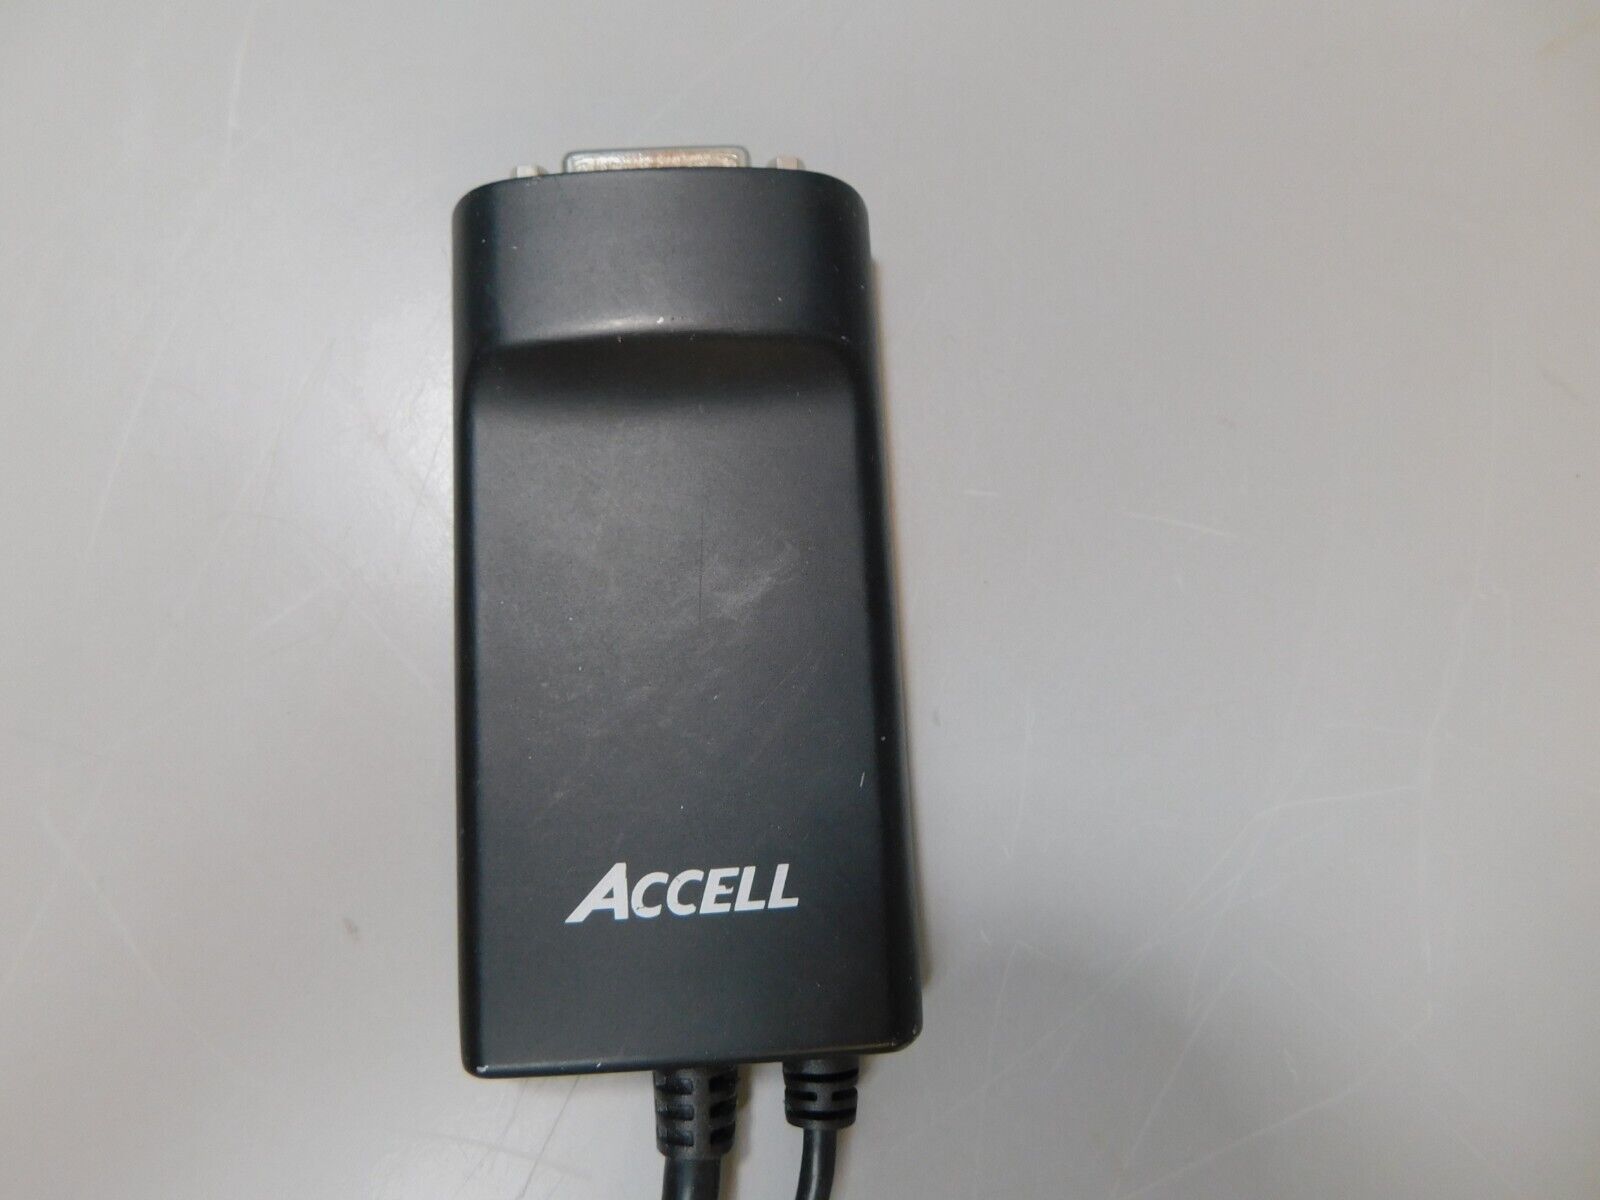 ACCELL B087B-002B ACTIVE DISPLAYPORT DP TO DVI DUAL-LINK ADAPTER